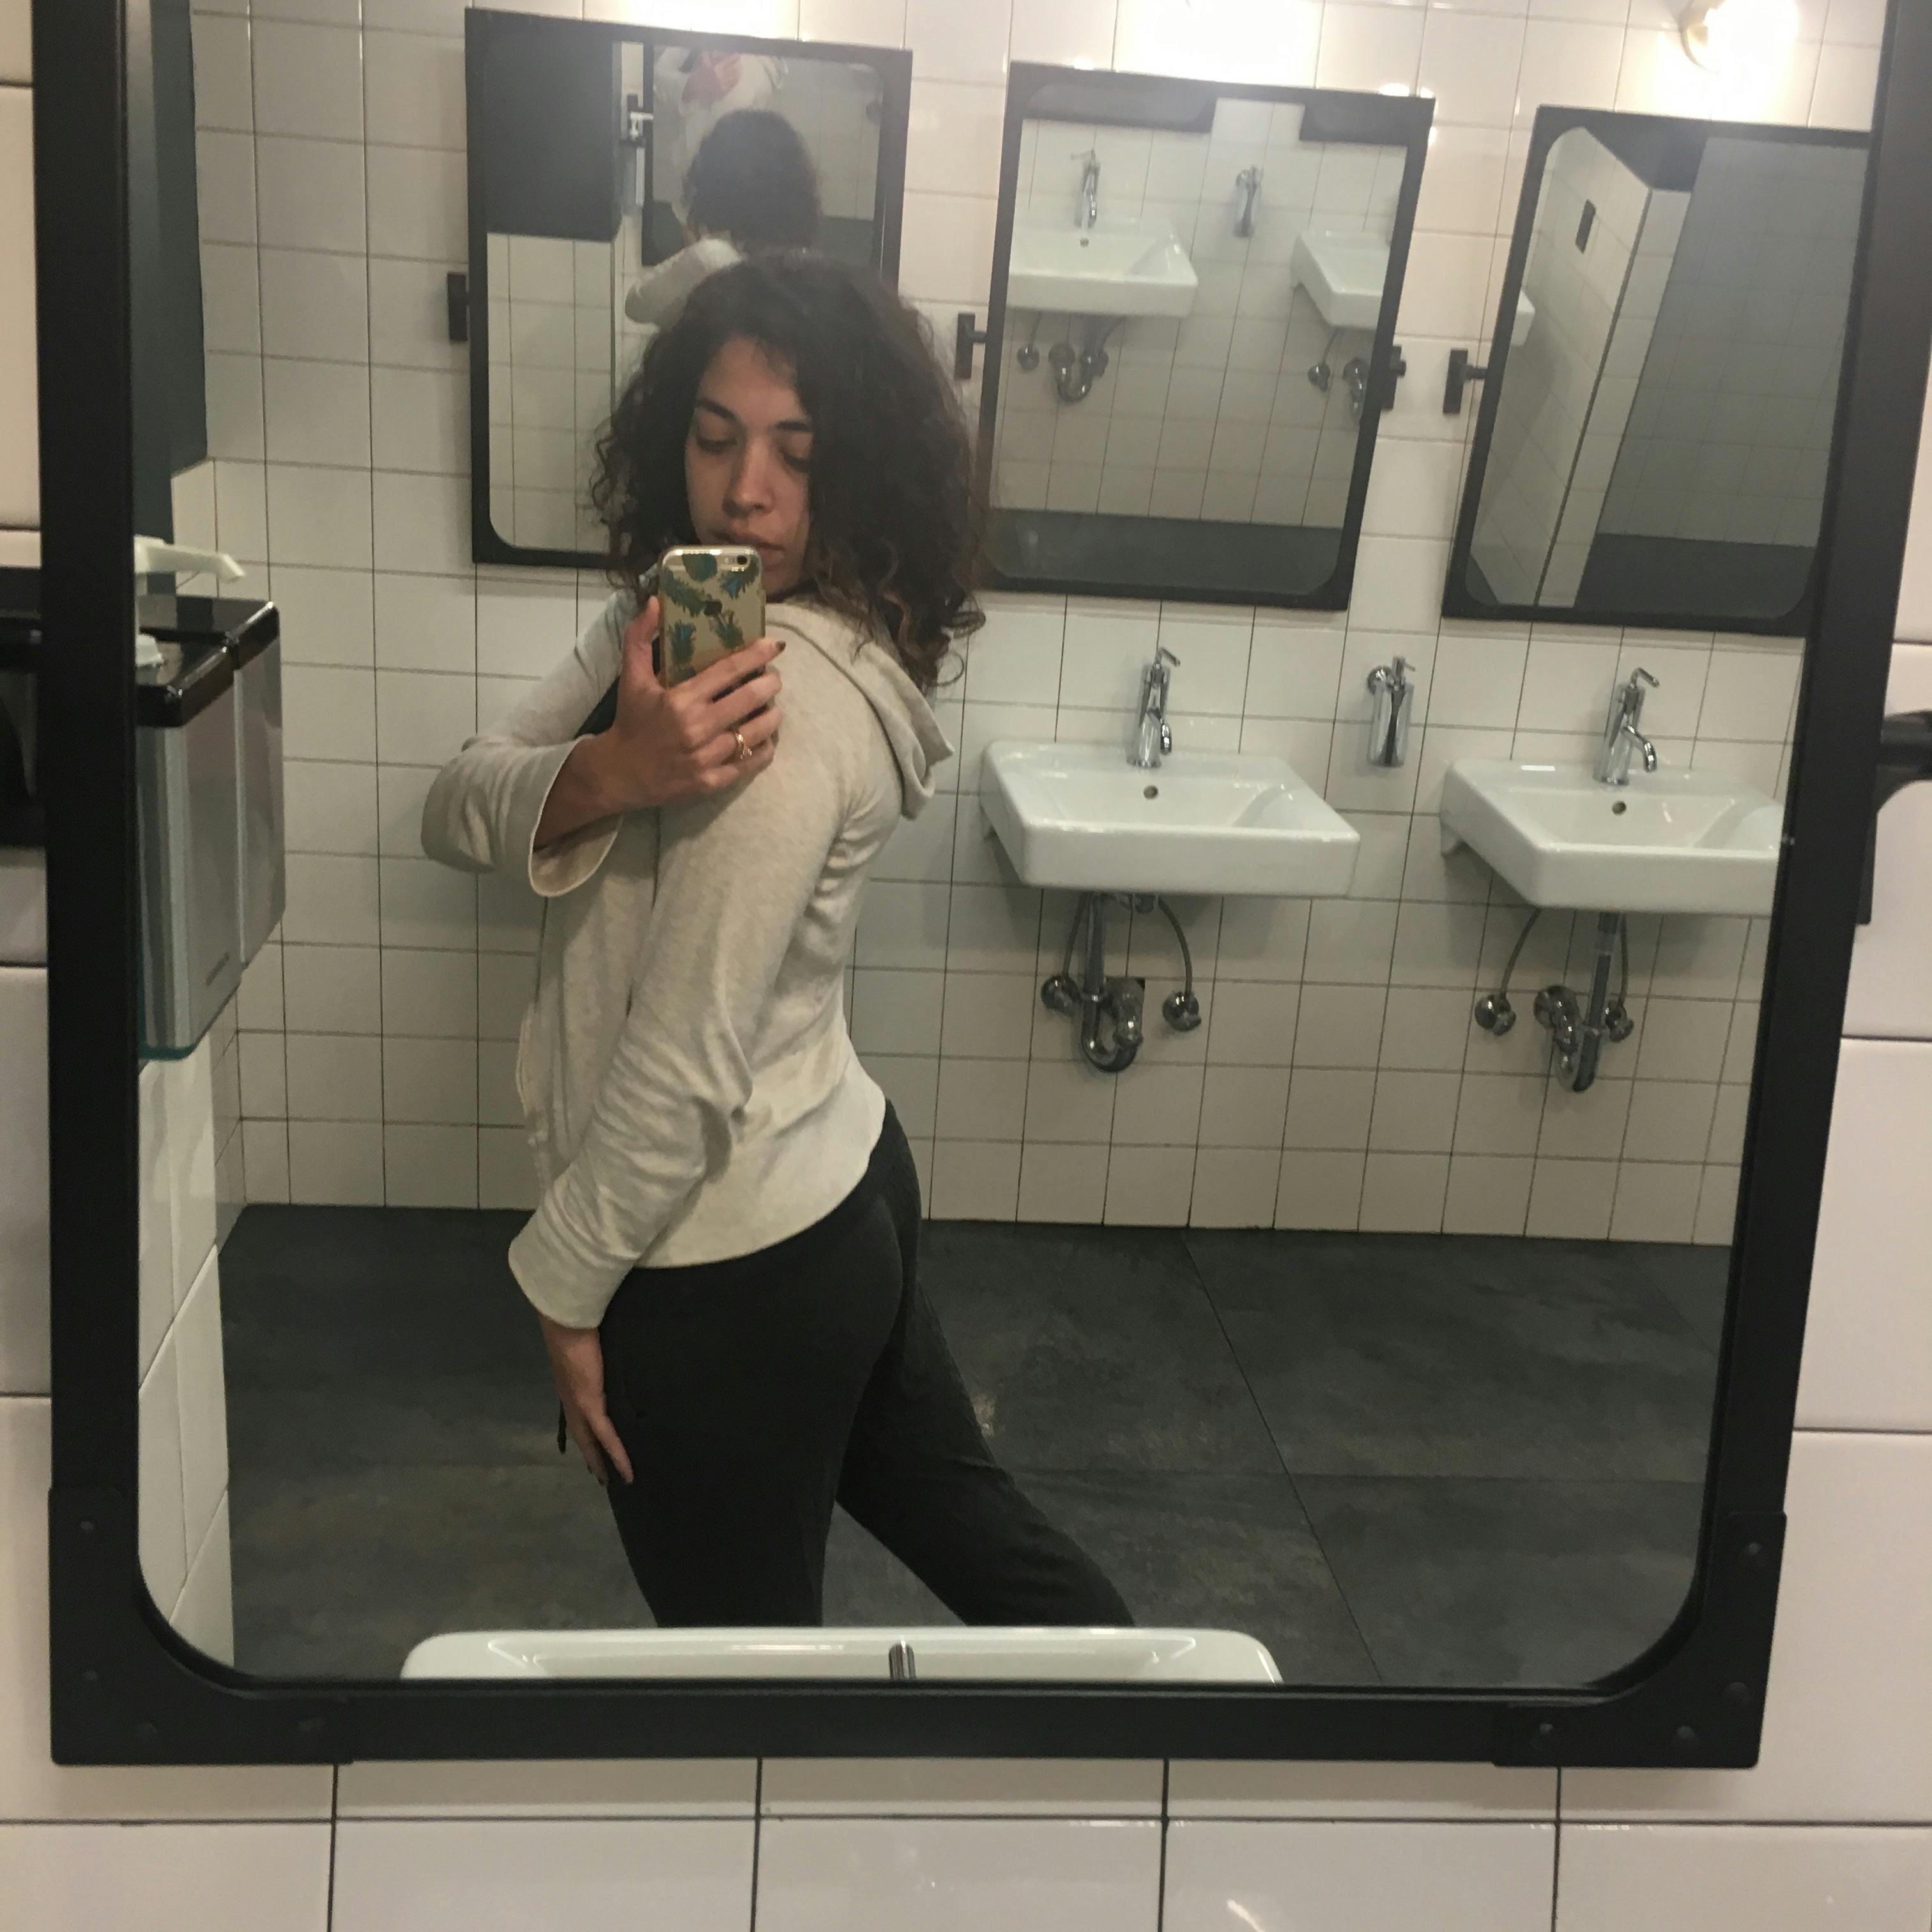 We tested out some butt selfie tips - The Daily Dot